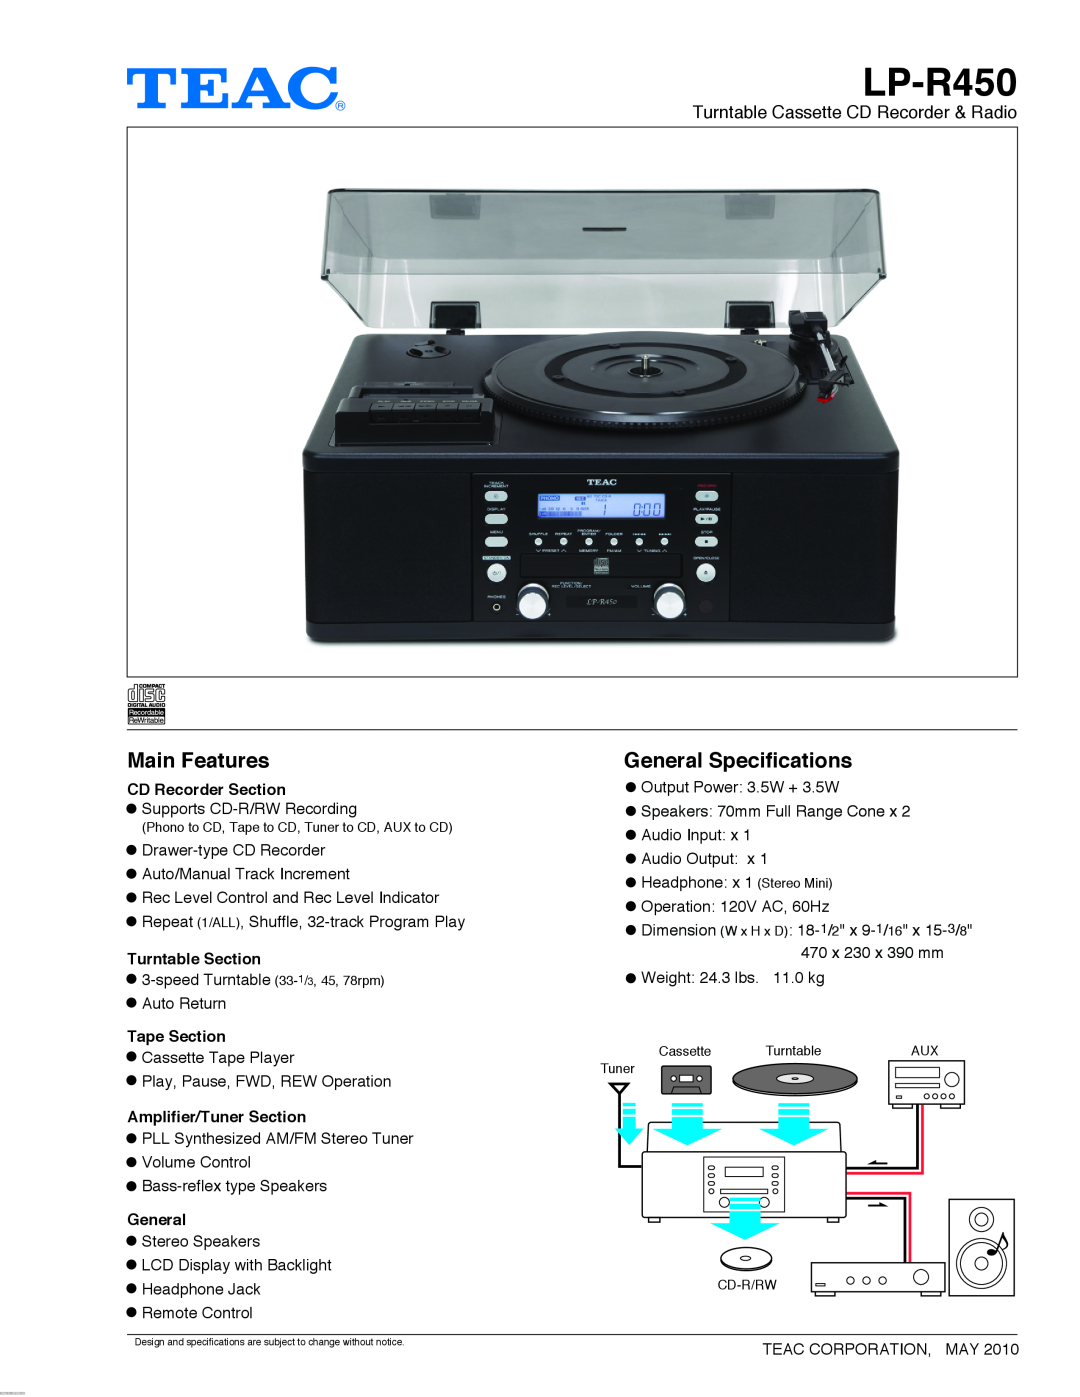 Teac LP-R450 specifications Main Features, General Specifications, Turntable Cassette CD Recorder & Radio, Tape Section 